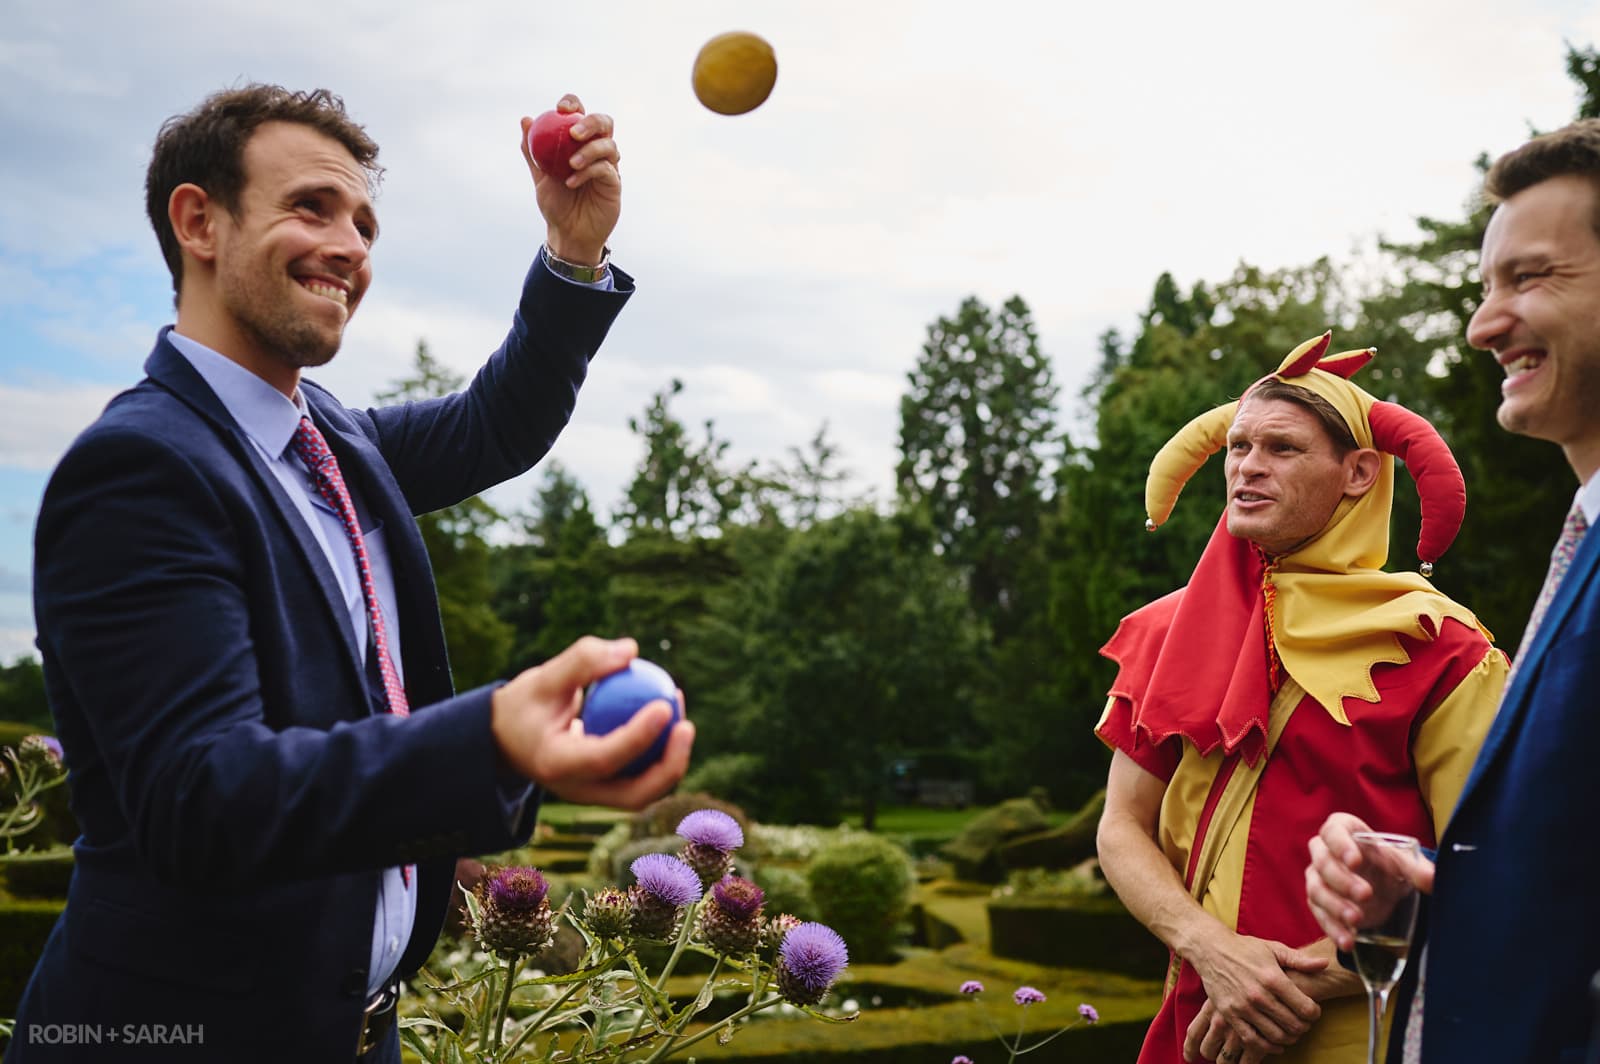 Wedding guests juggles balls as court jester watches